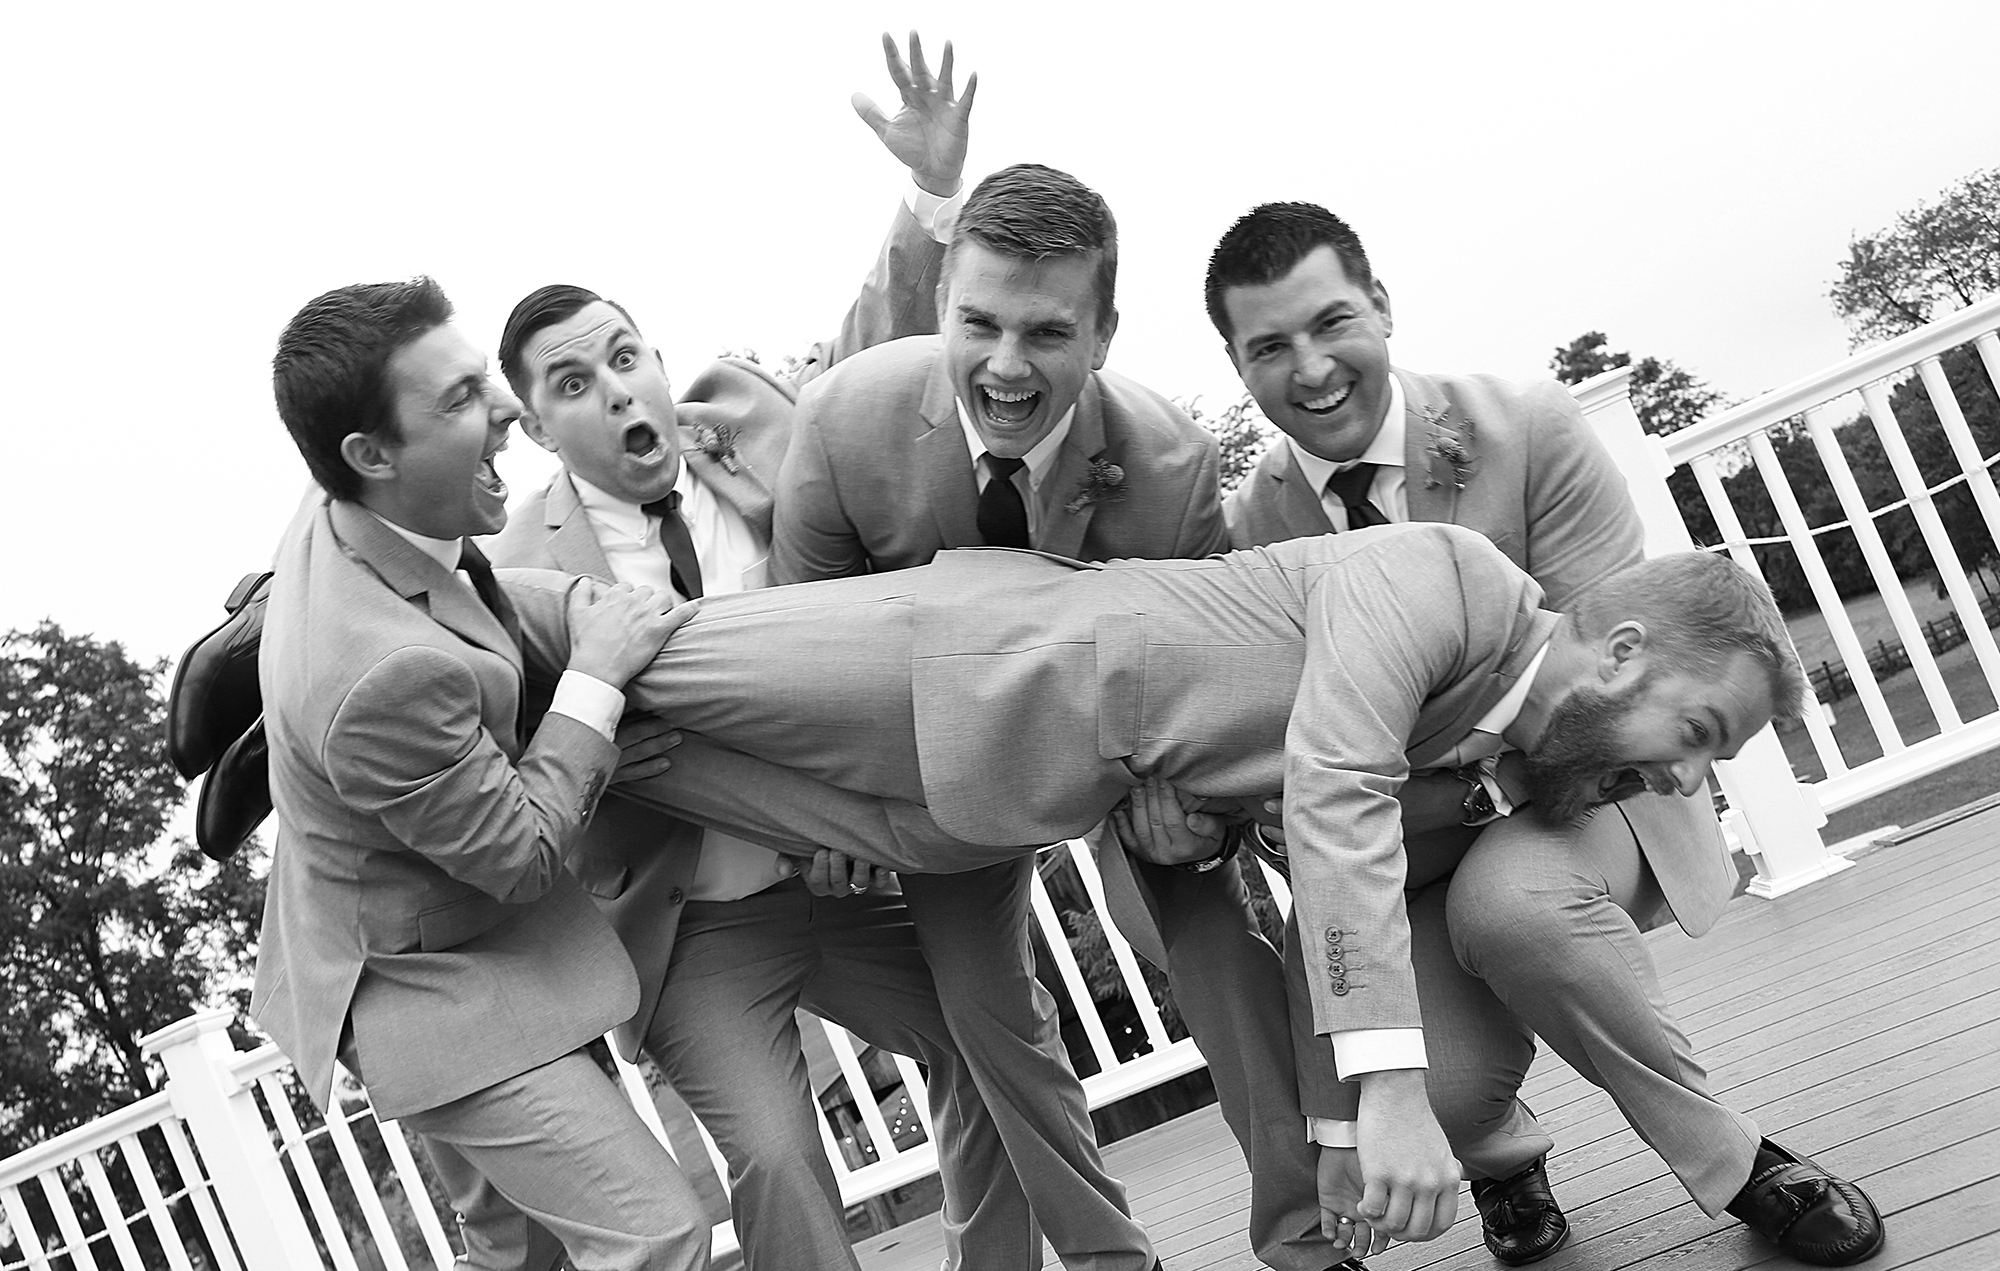 Groomsmen joyfully lift the radiant bride on a deck, their faces alight with happiness and celebration in this delightful and spirited moment.